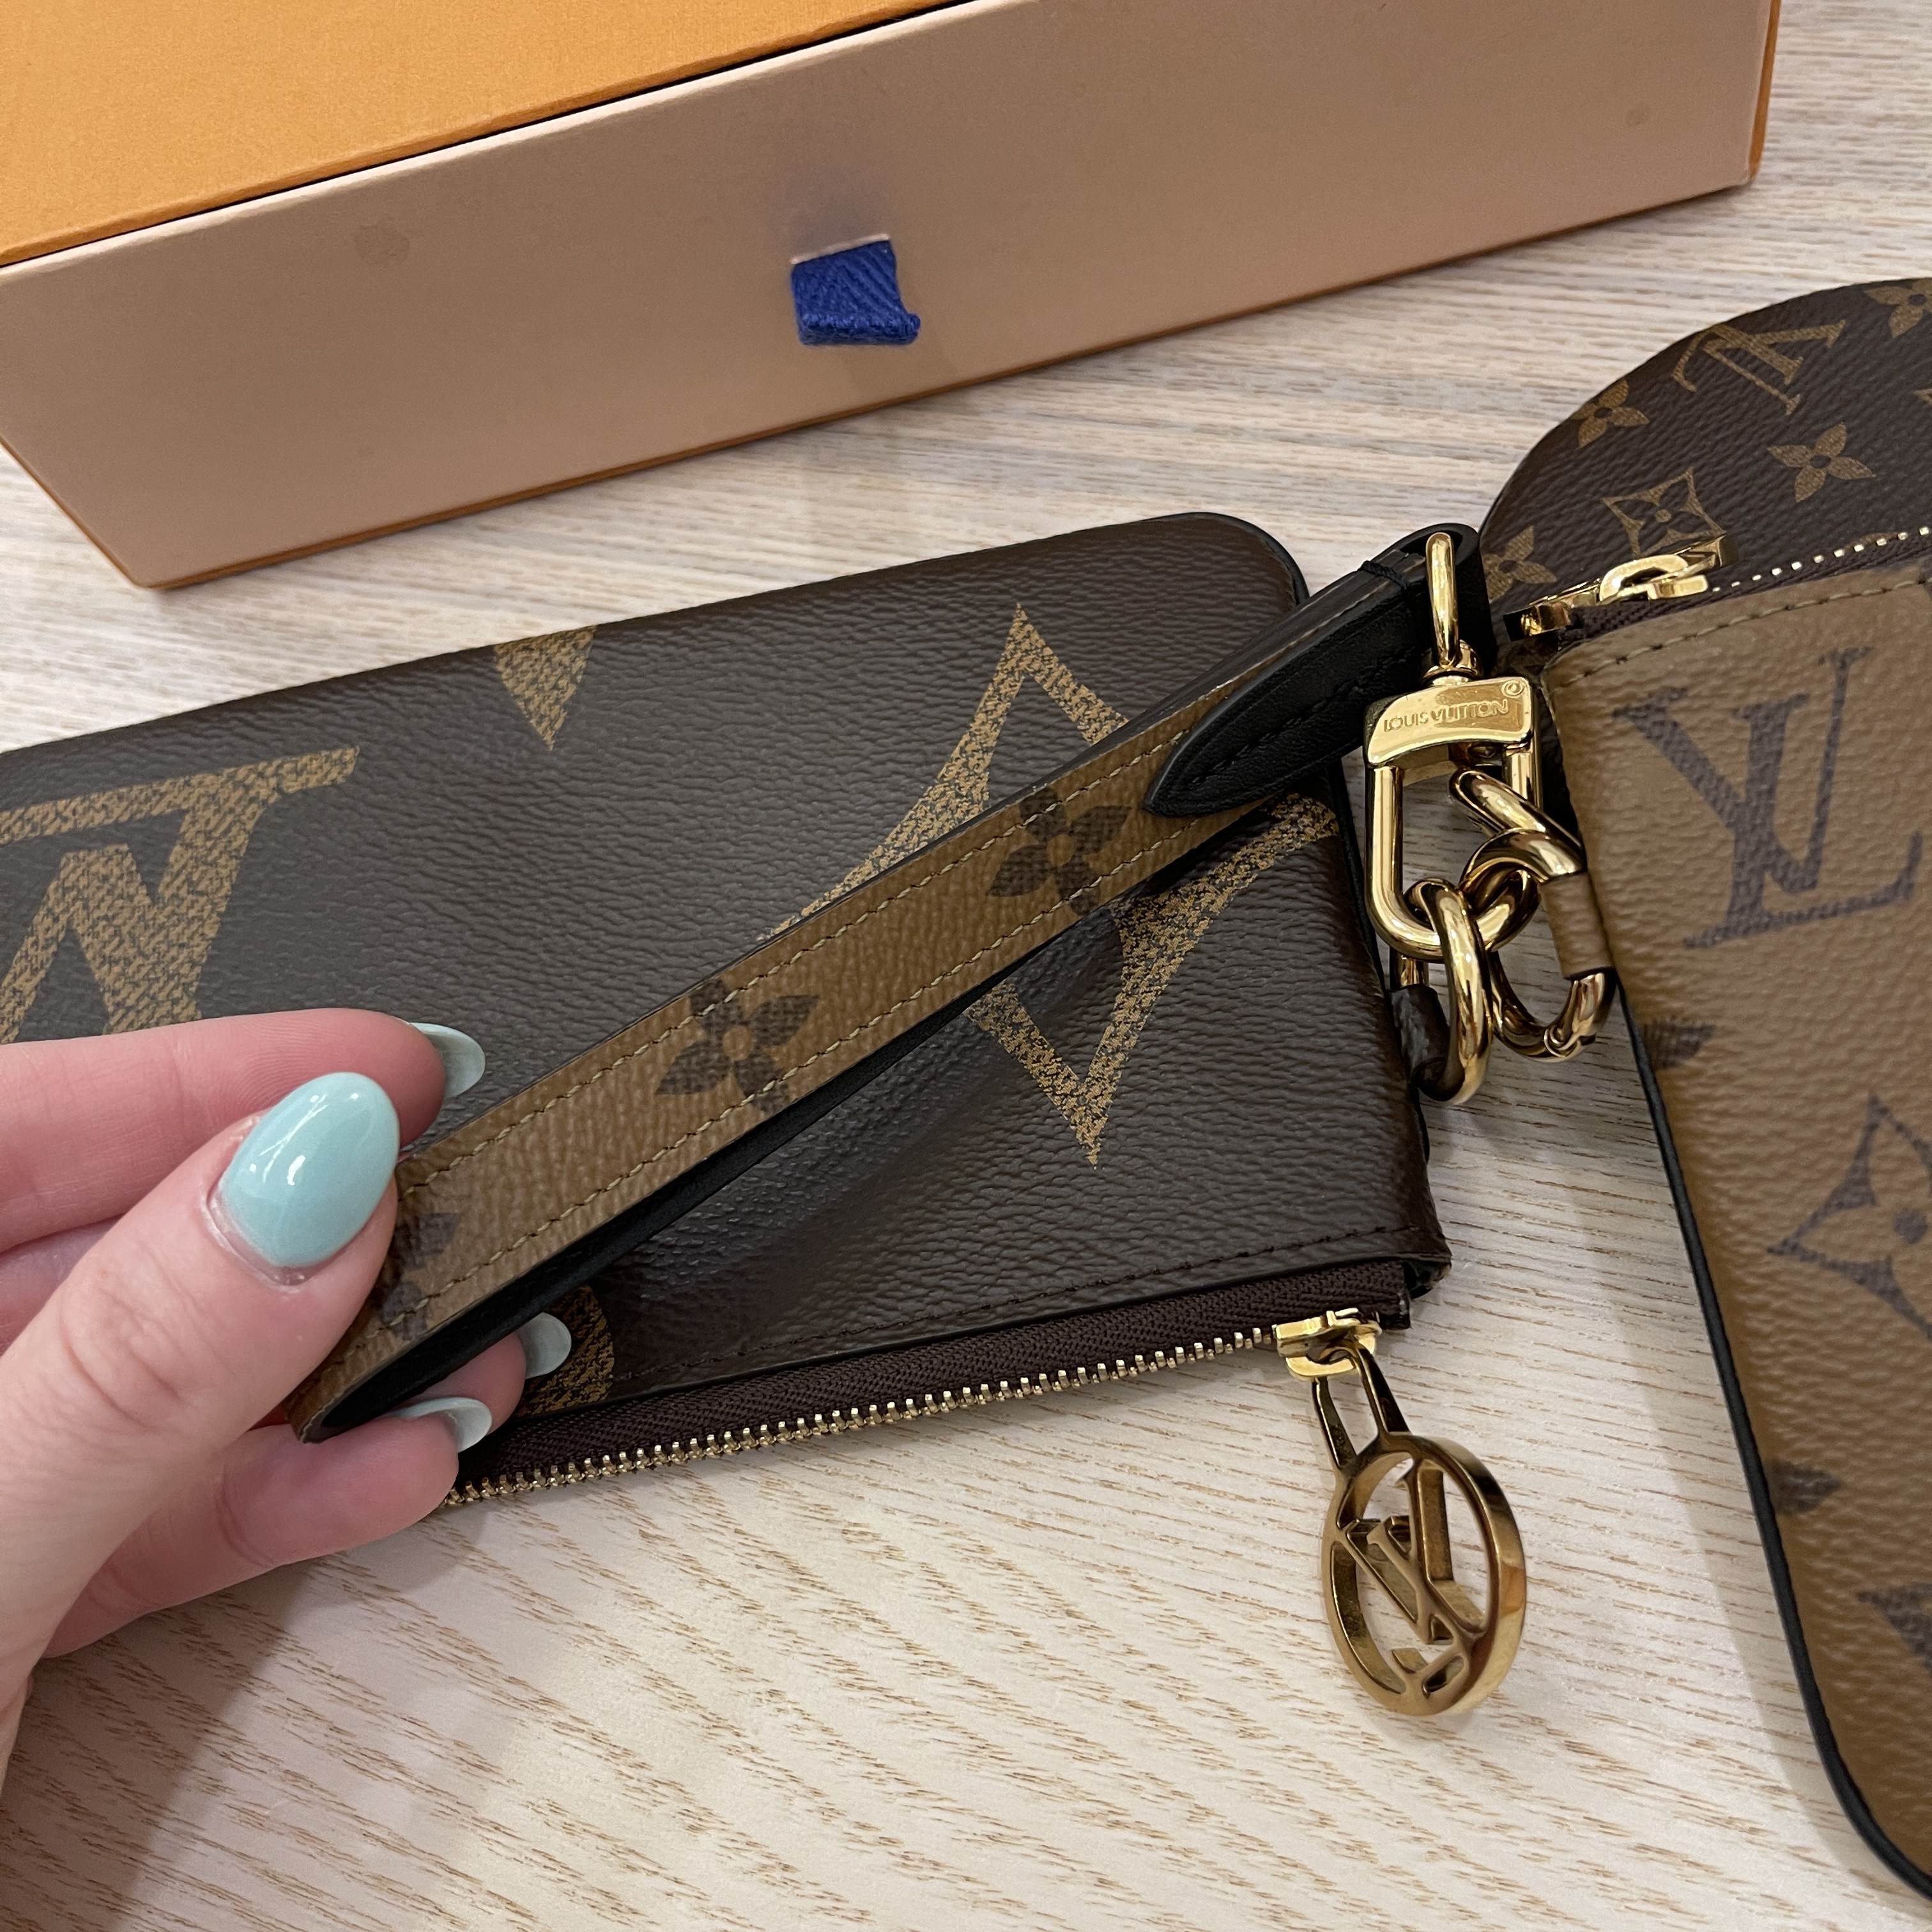 Authentic LV Trio Pouch: Discounted 214188/5